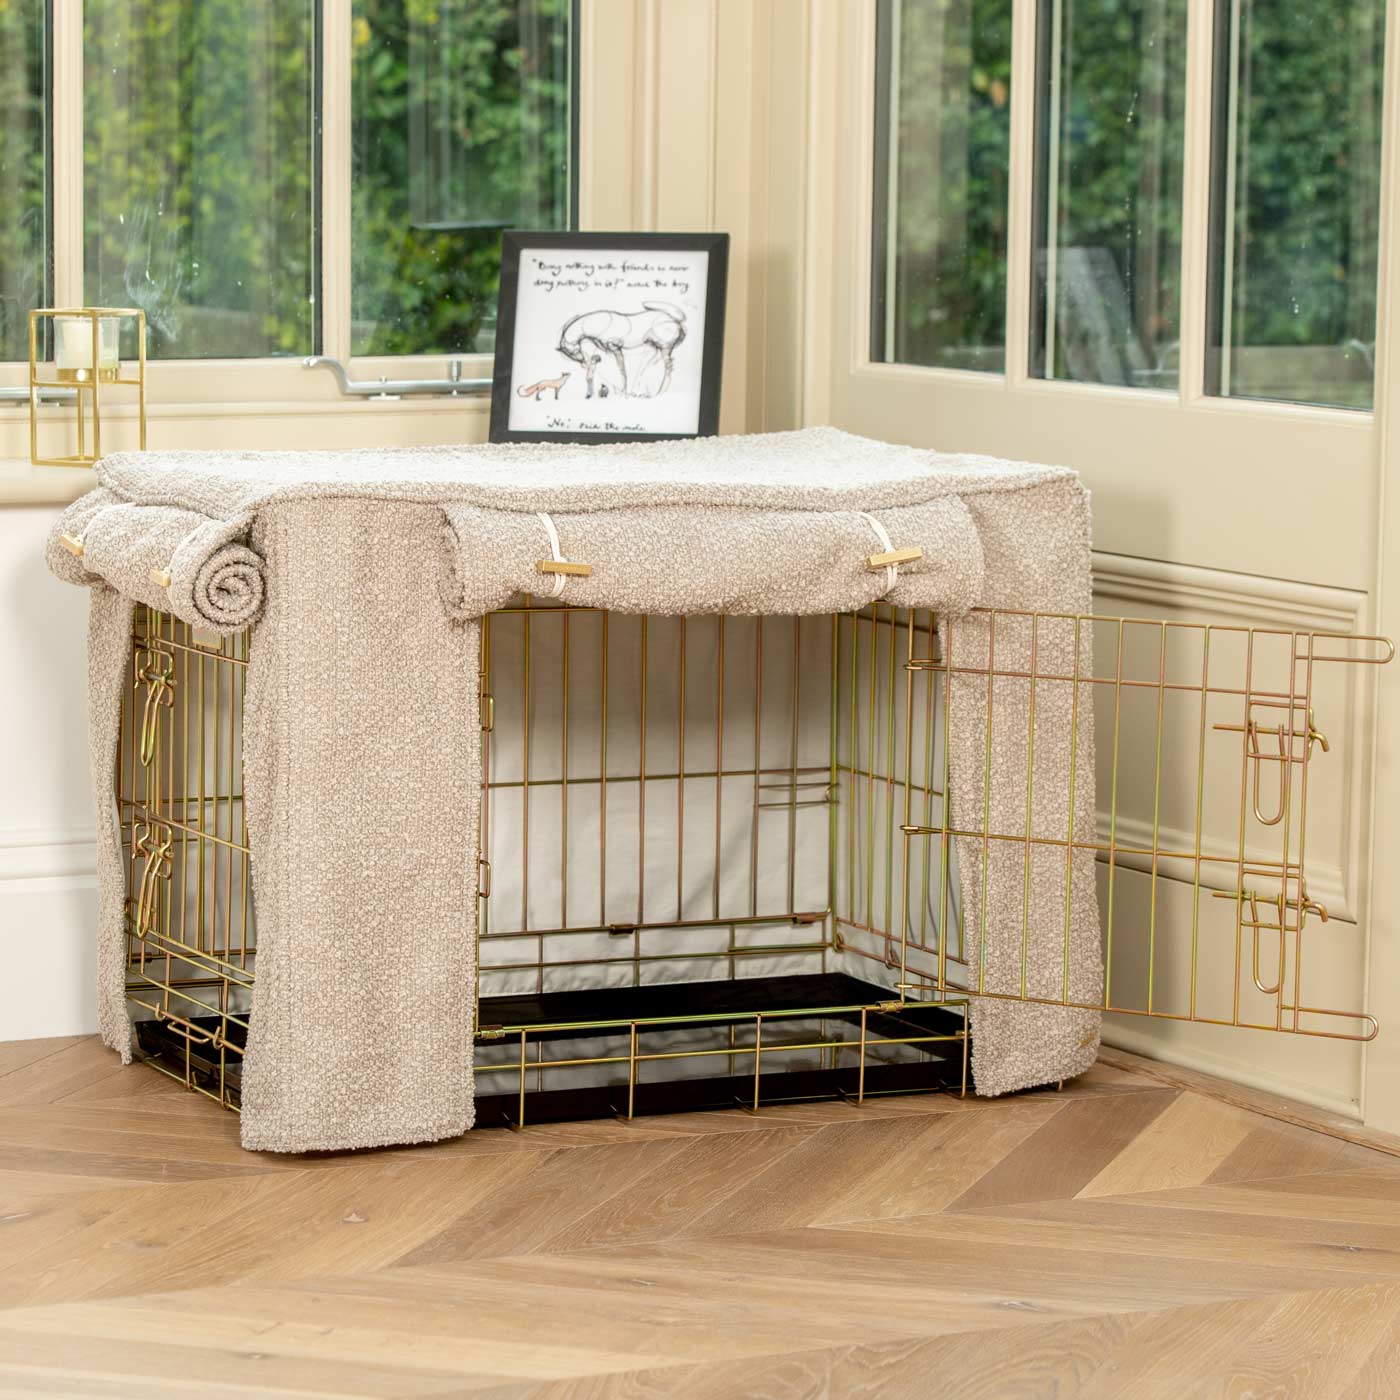 [colour:mink boucle] Discover Our Gold Heavy-Duty Dog Crate With Mink Bouclé Crate Cover! The Perfect Crate Accessory For The Ultimate Pet Den. Available To Personalise Here at Lords & Labradors